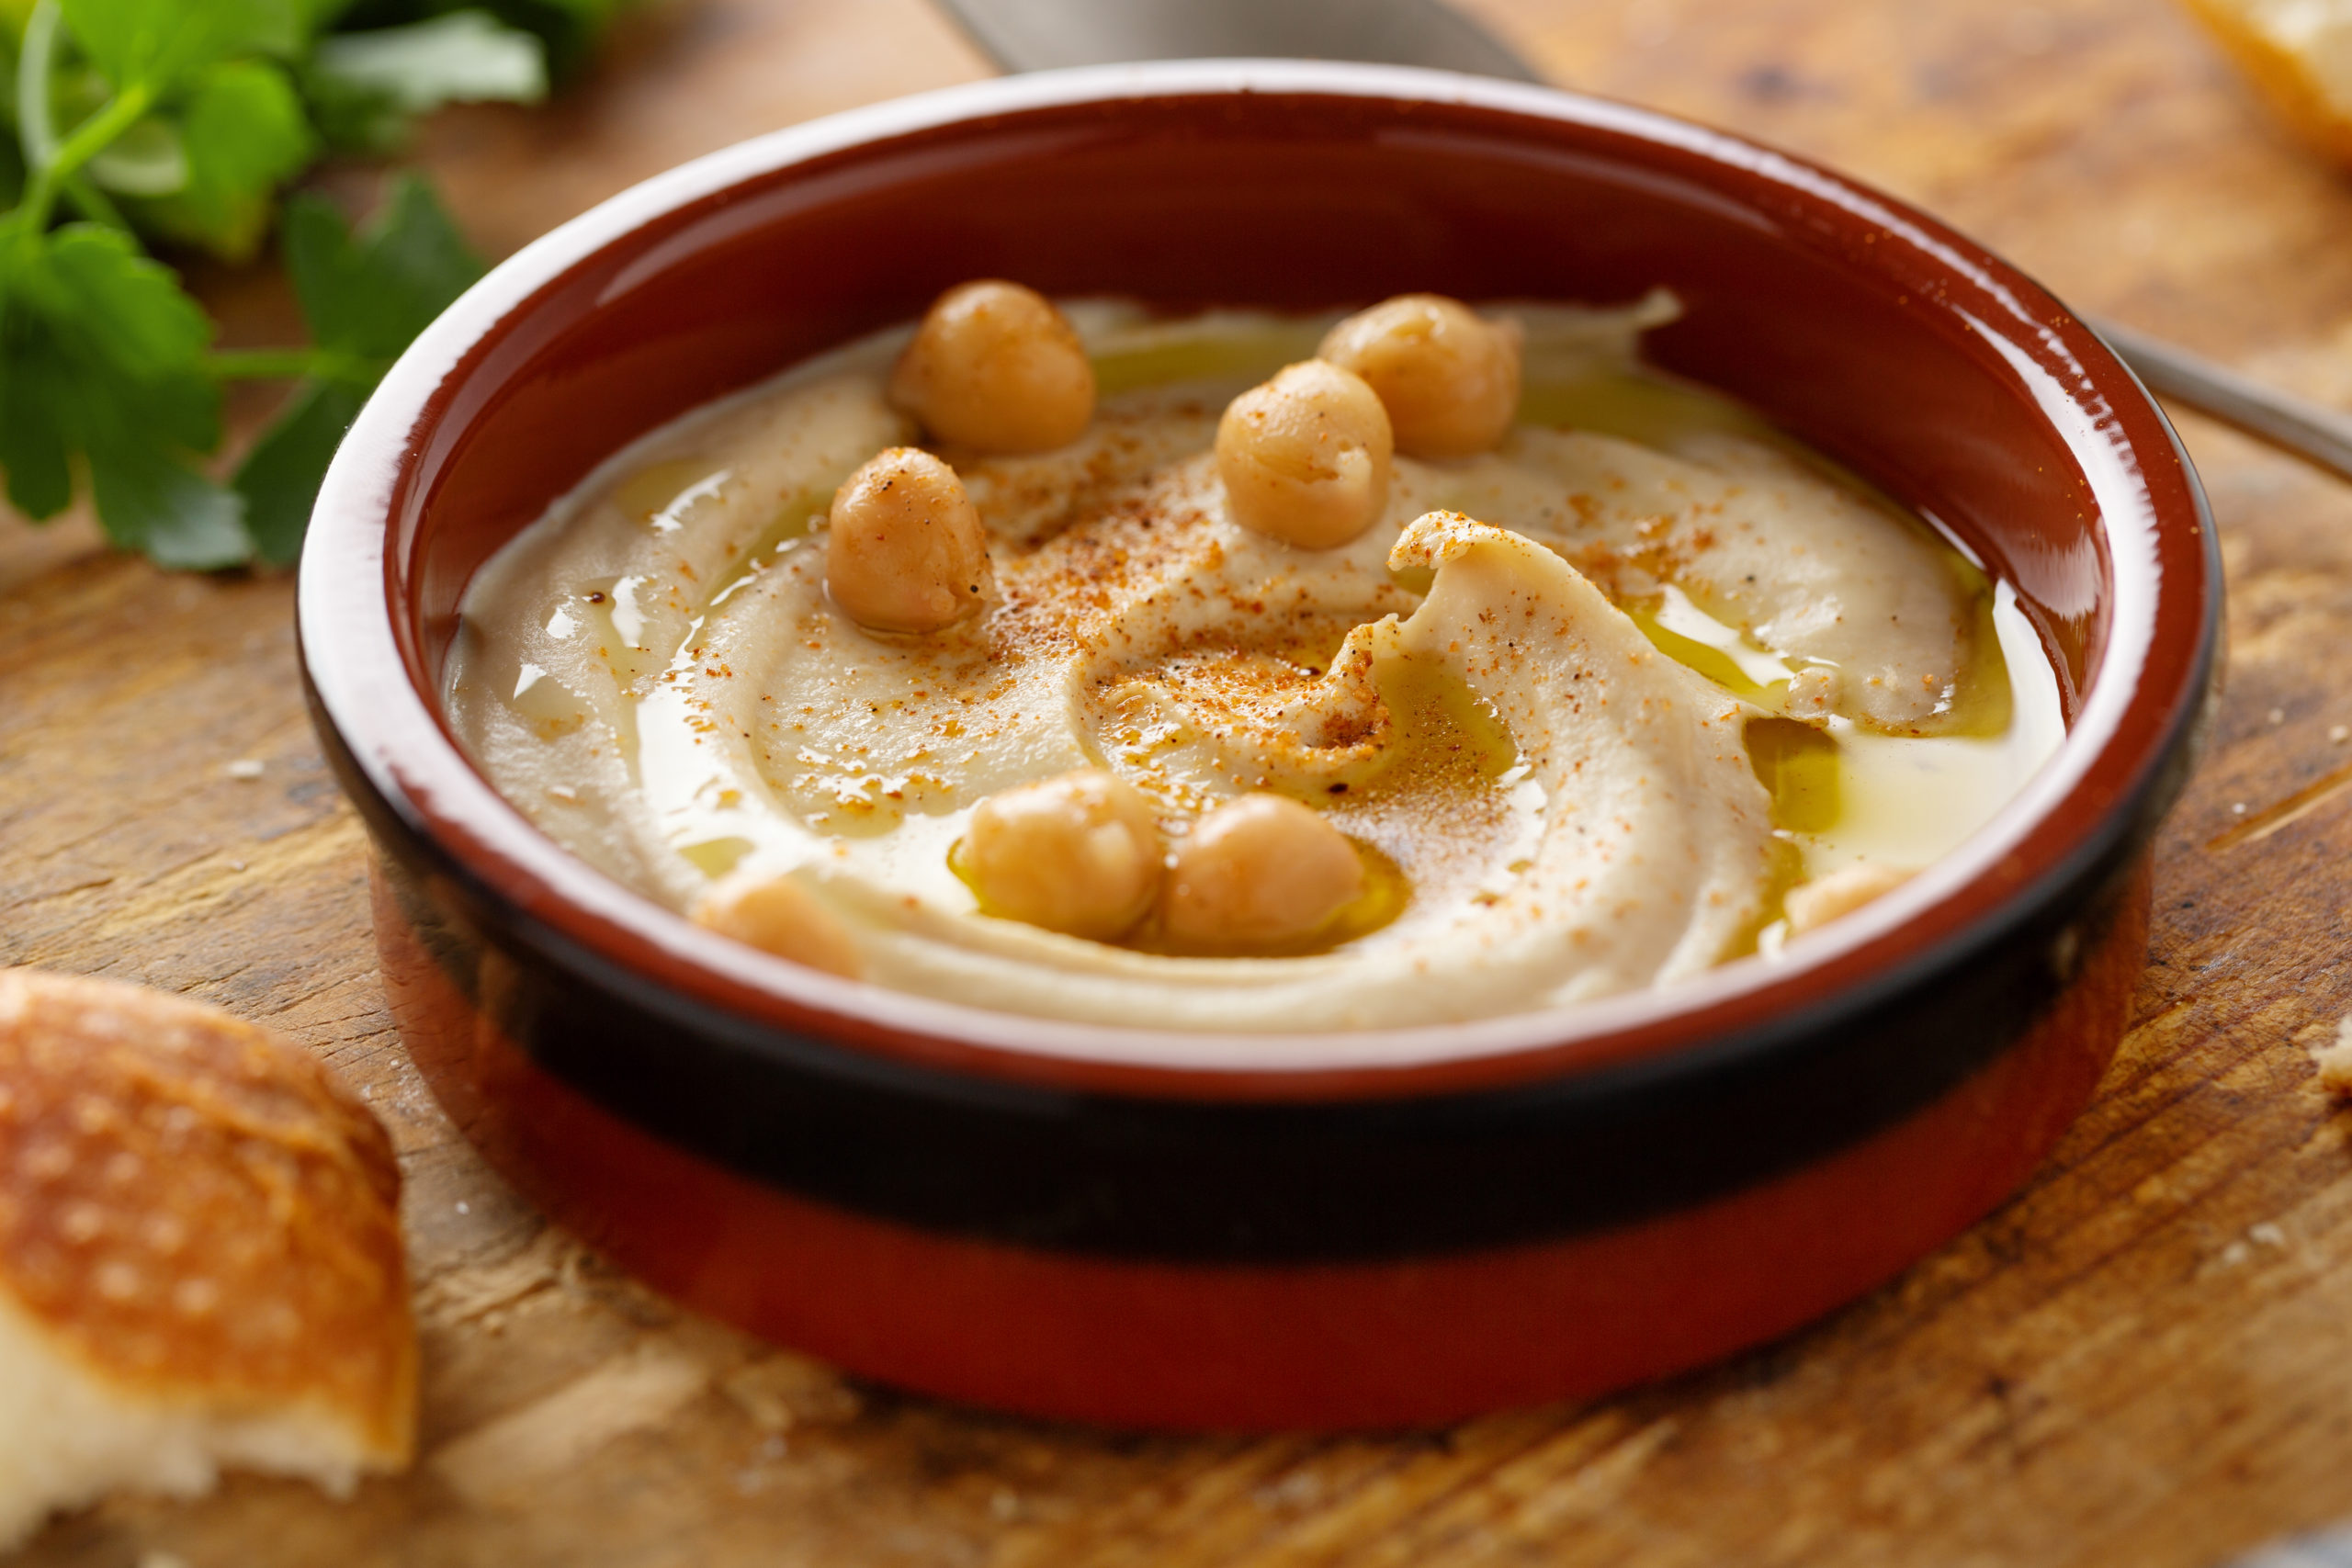 freshmade oriental classic hummus served bowl table